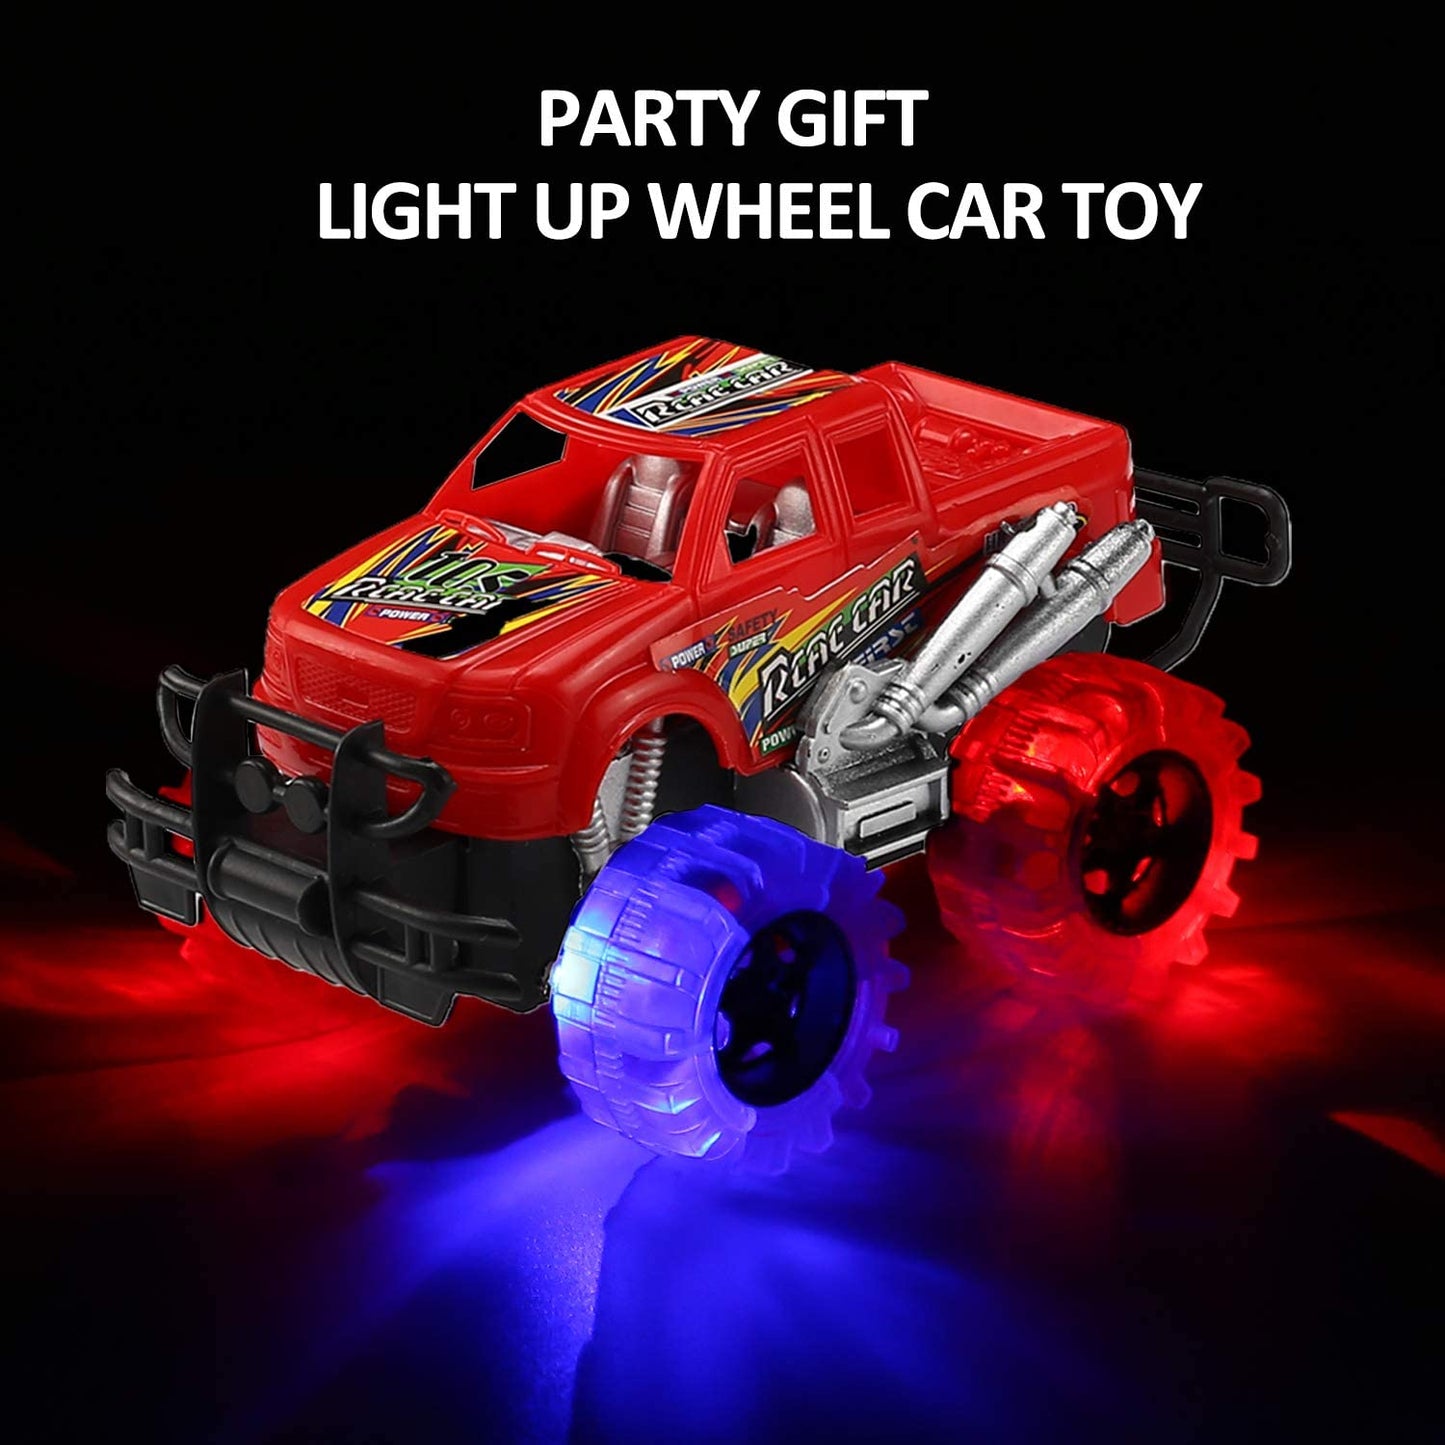 2 Pack Light up Monster Truck Car Toy with Beautiful Flashing LED Tires, Best Birthday Gift for Boy Girl Ages 3+, Push N Go Cars, Friction Toy, Race Truck Car for Kid Party Favors and Daily Play